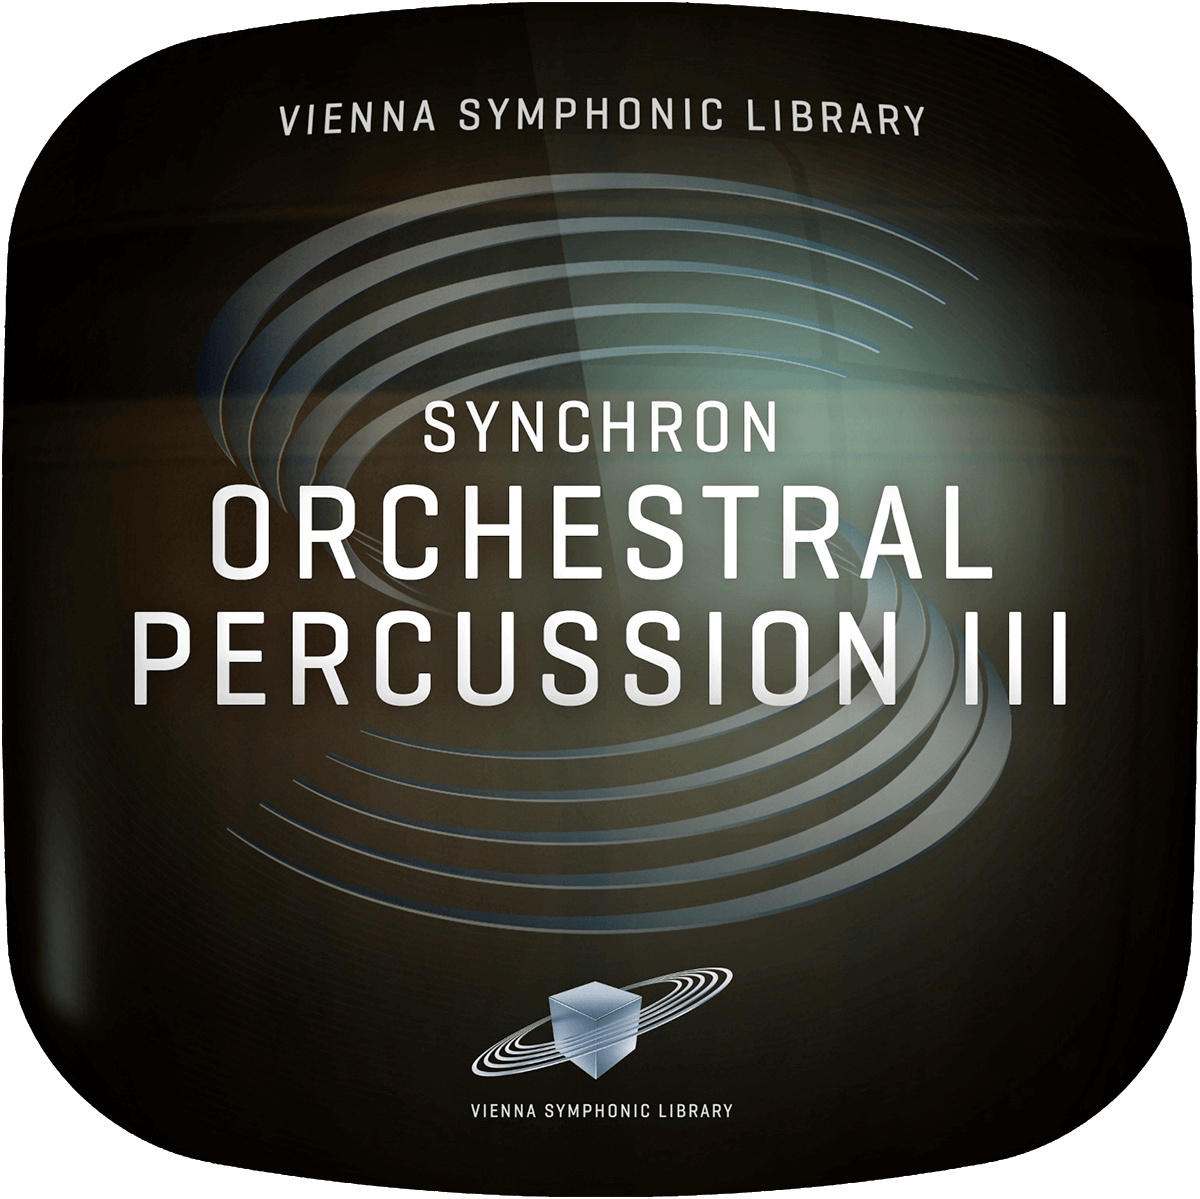 VSL Synchron Orchestral Percussion III